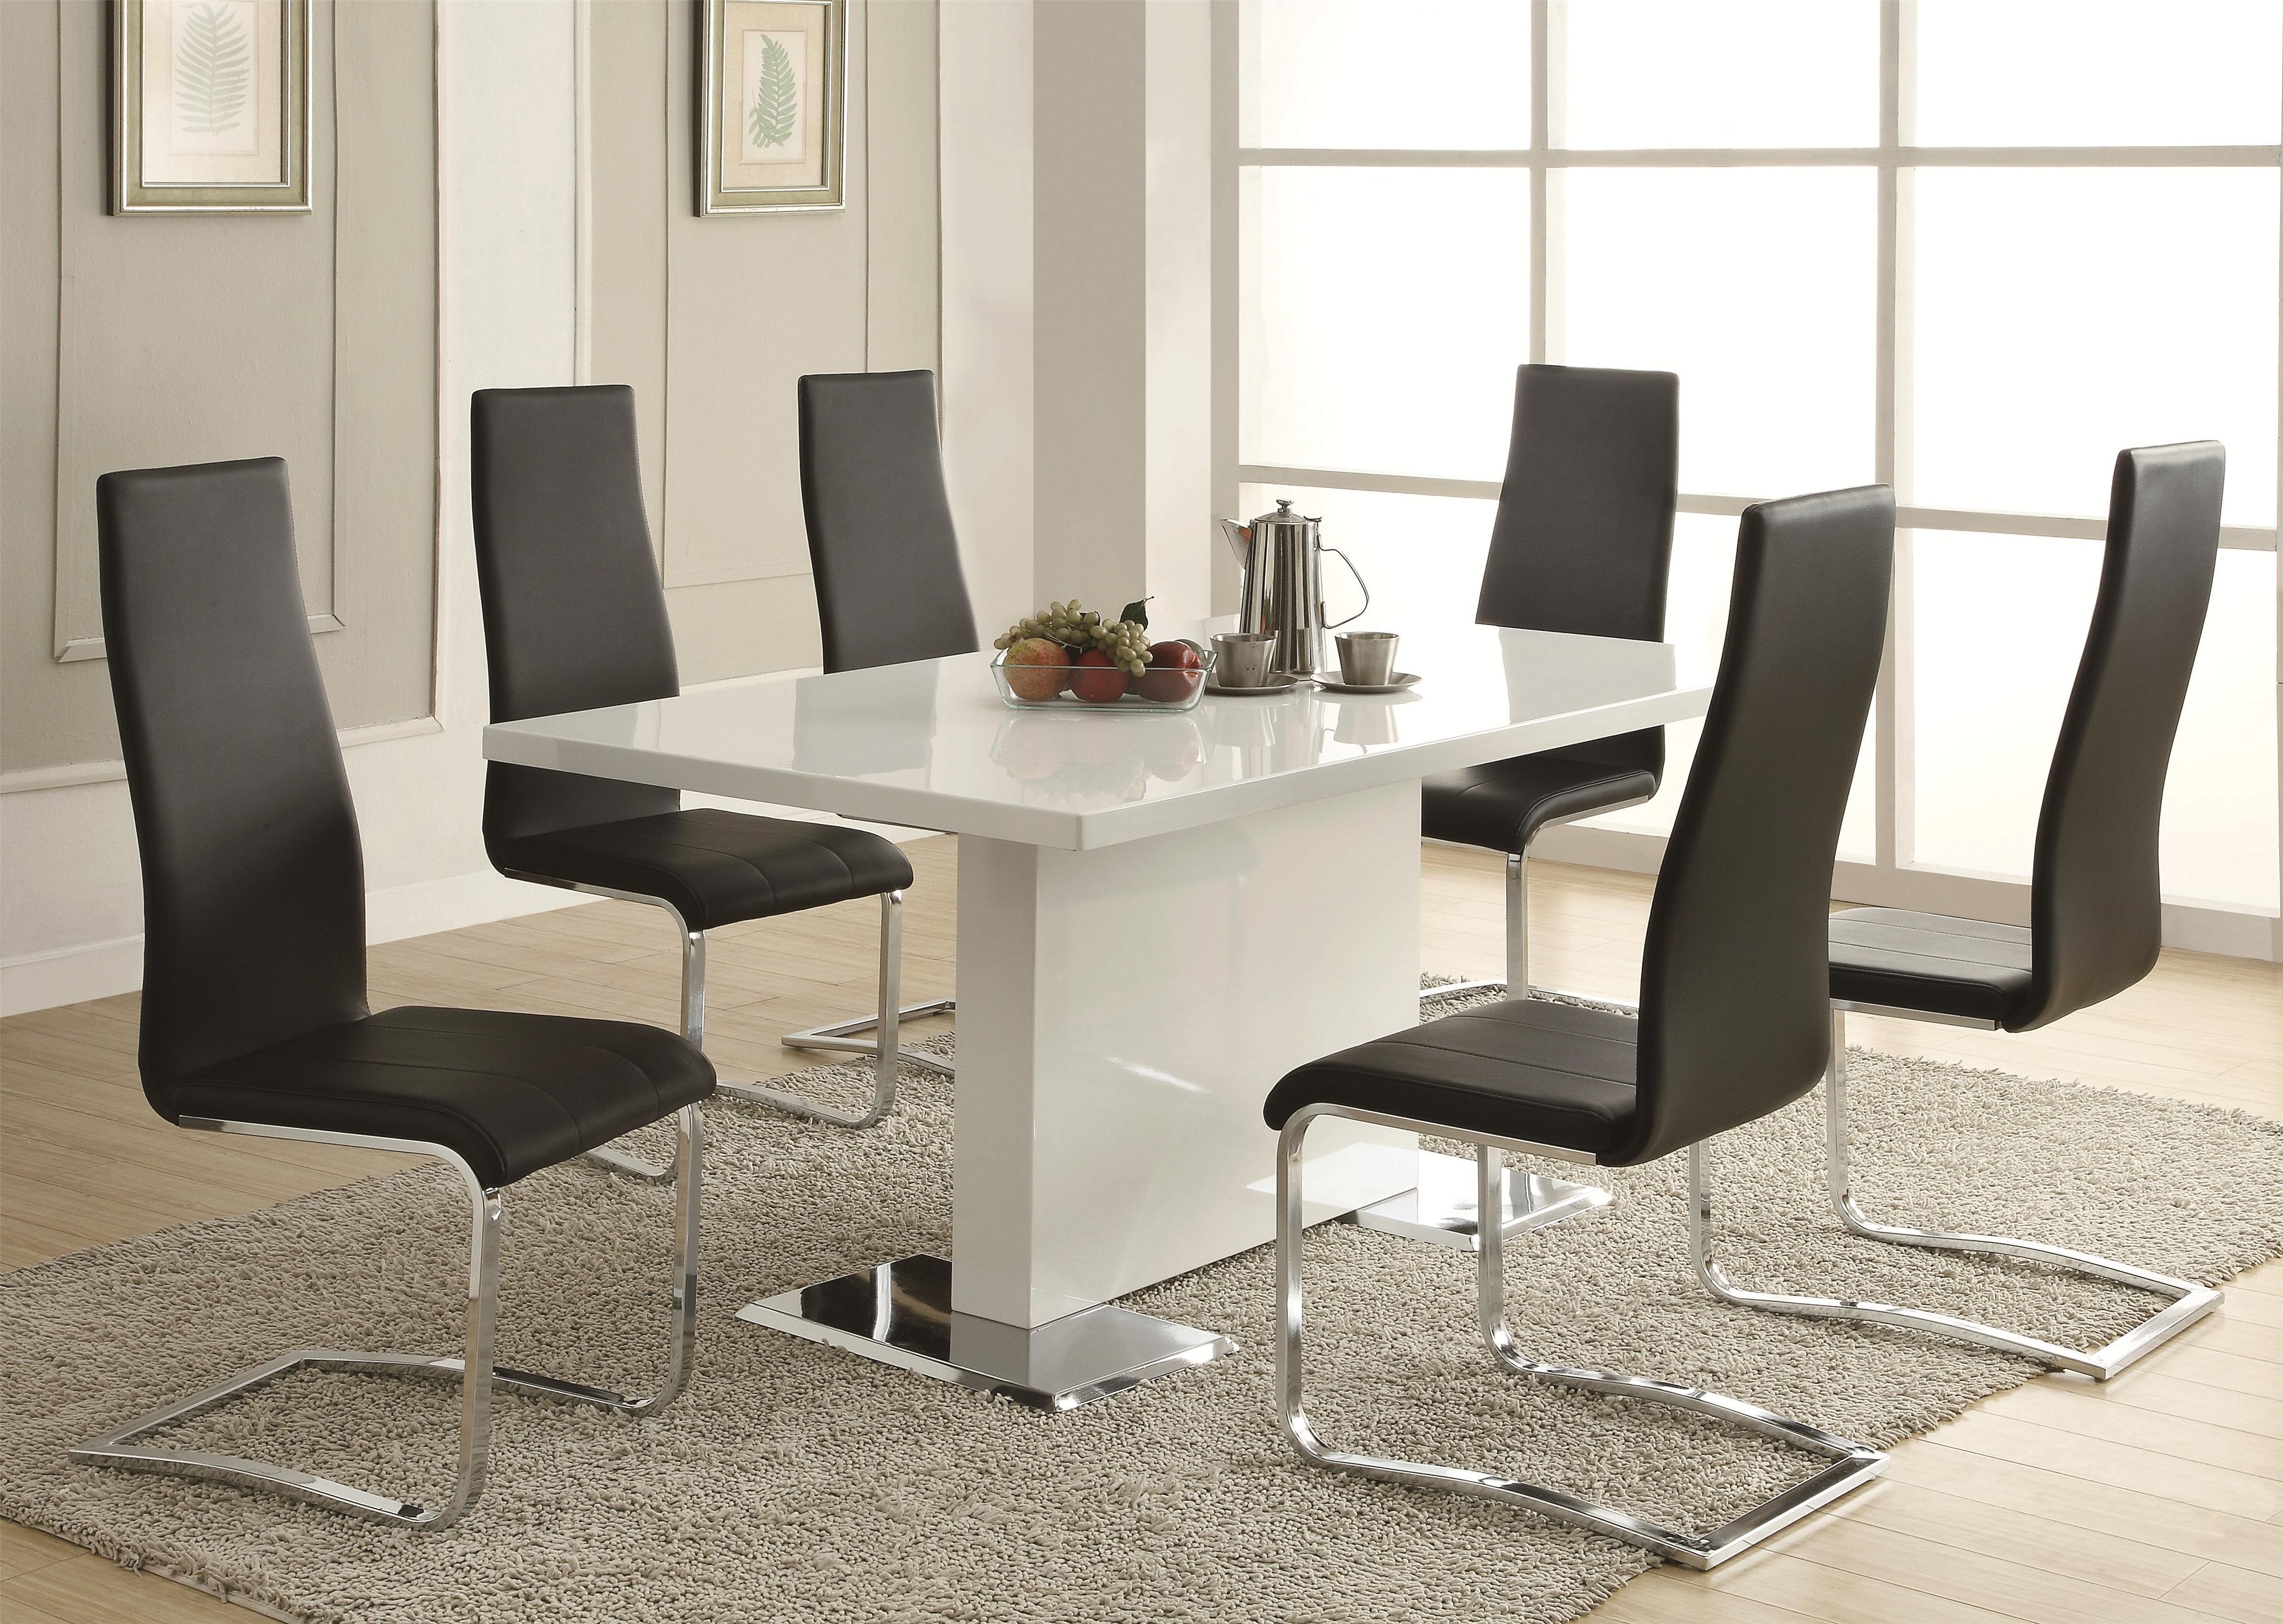 Get Hold Of Some Modern Dining Room Furniture